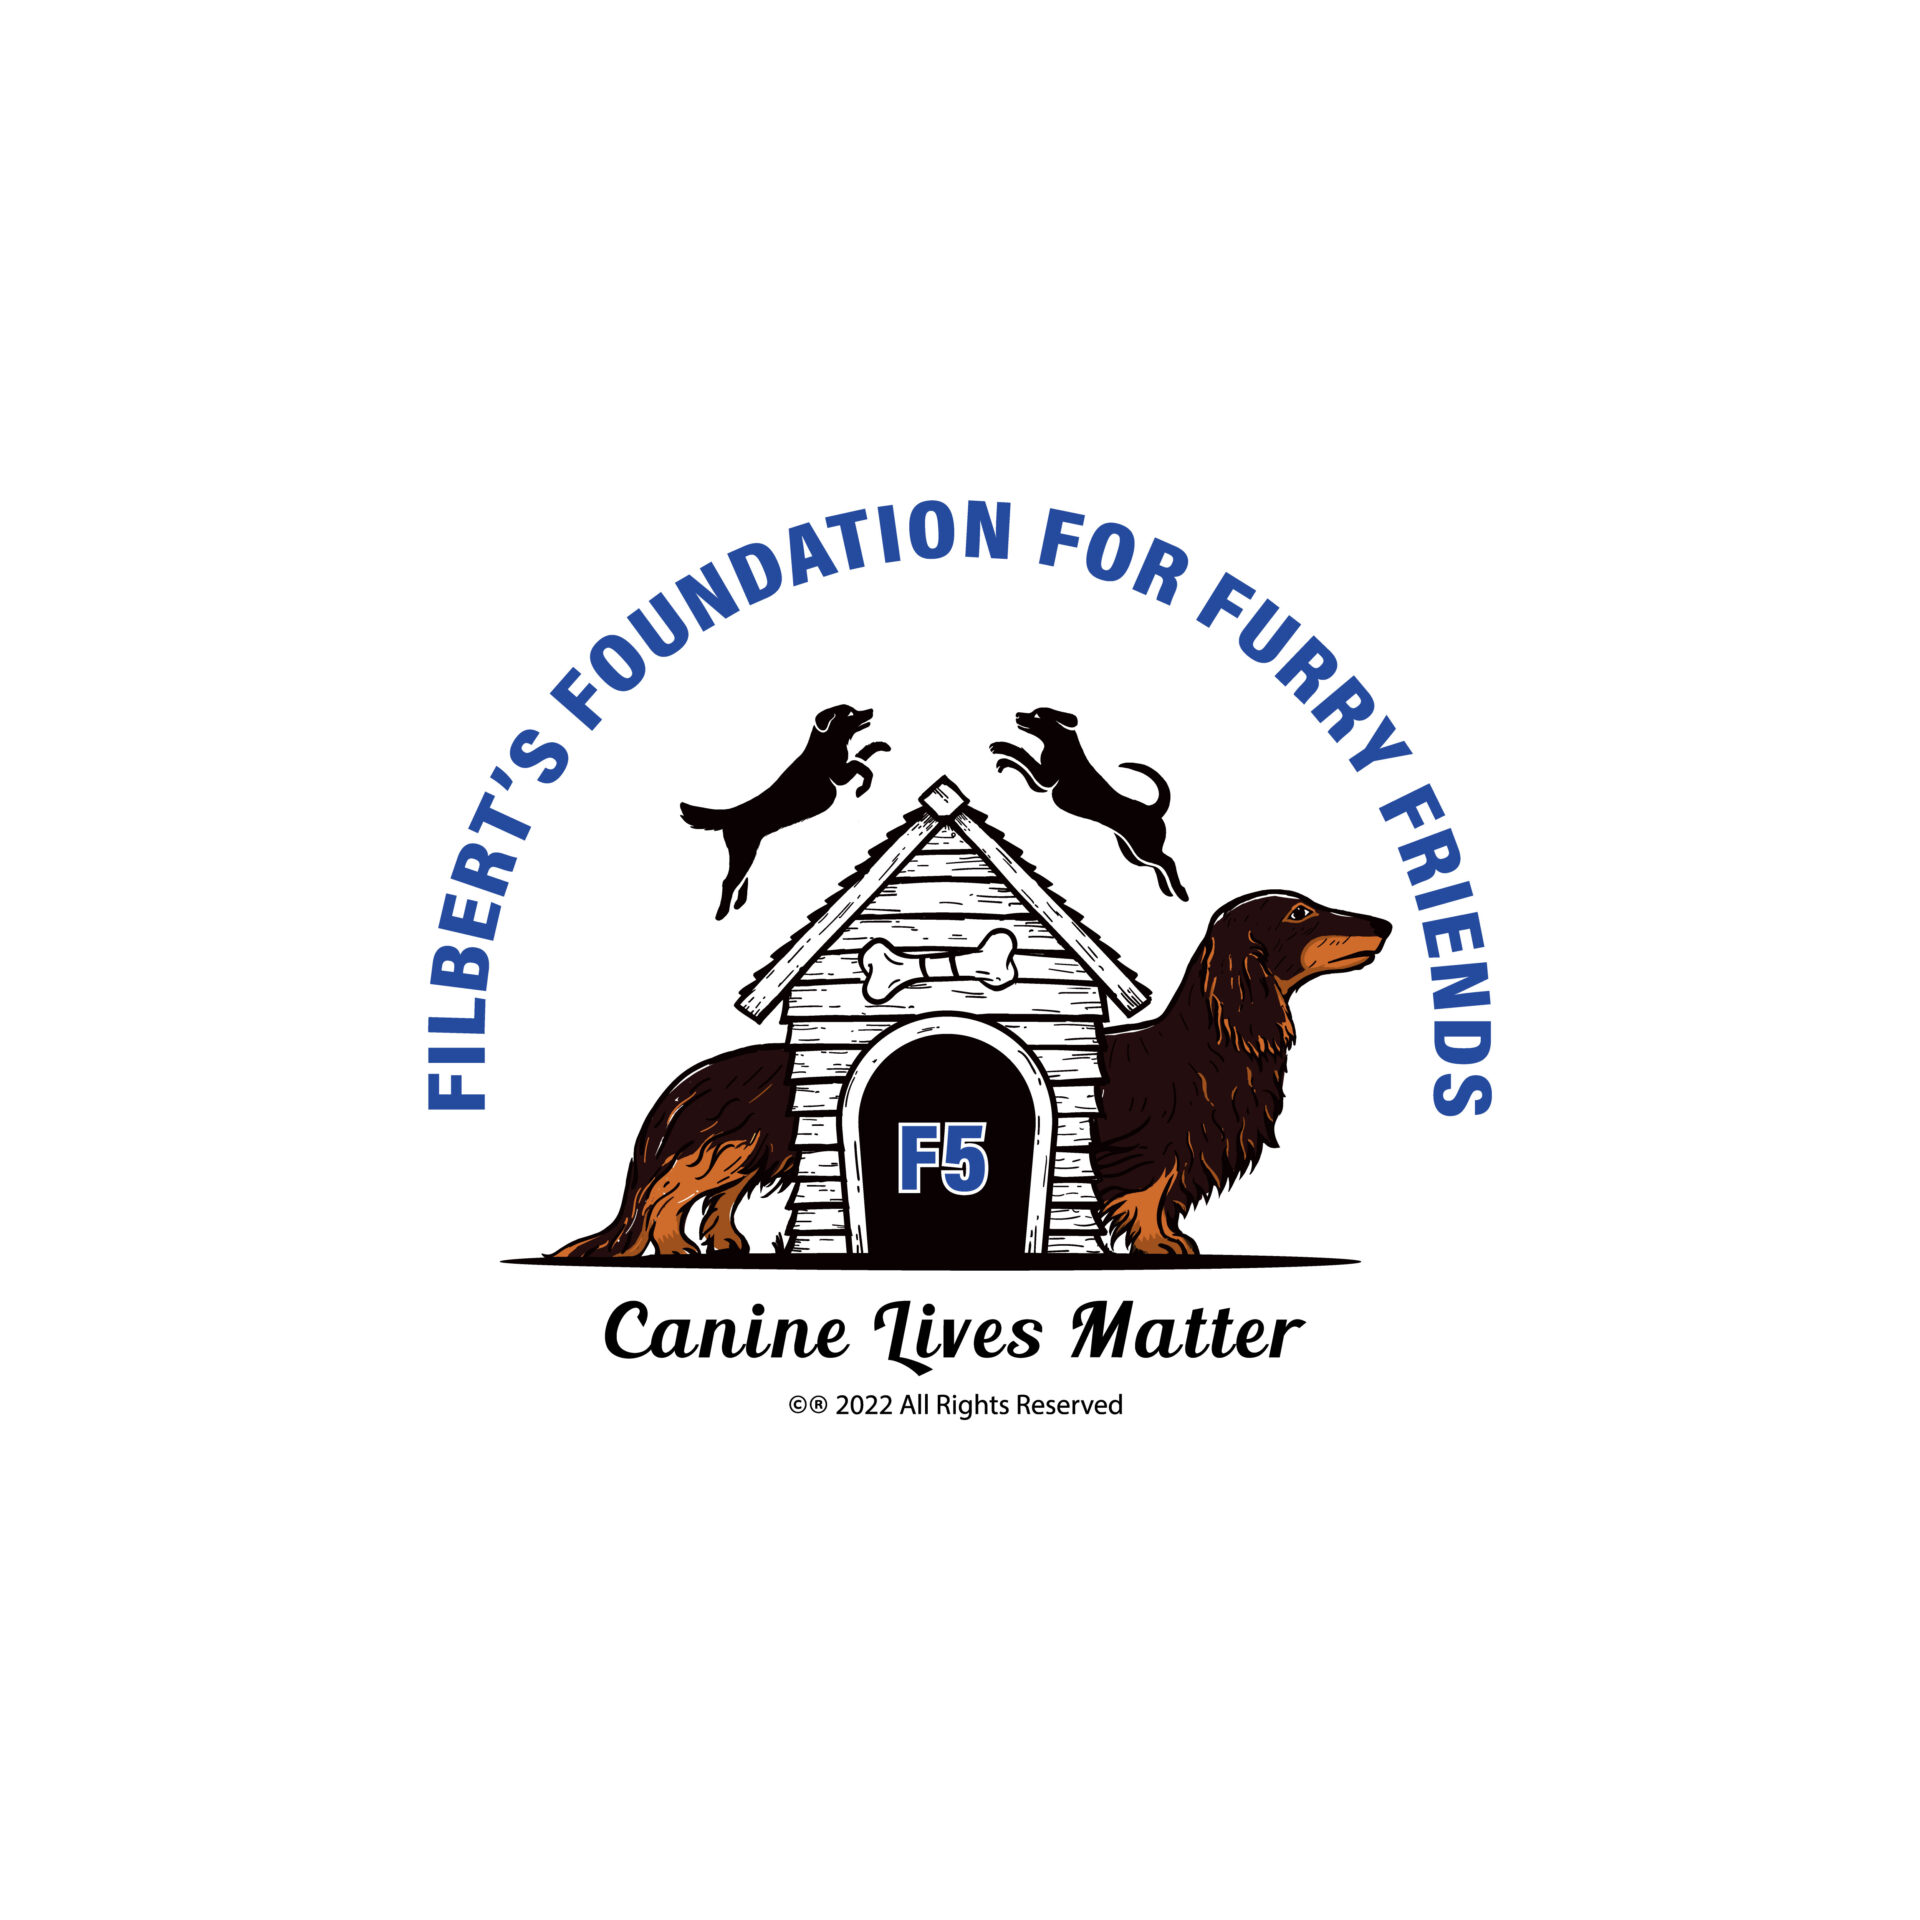 Filbert's Foundation for Furry Friends